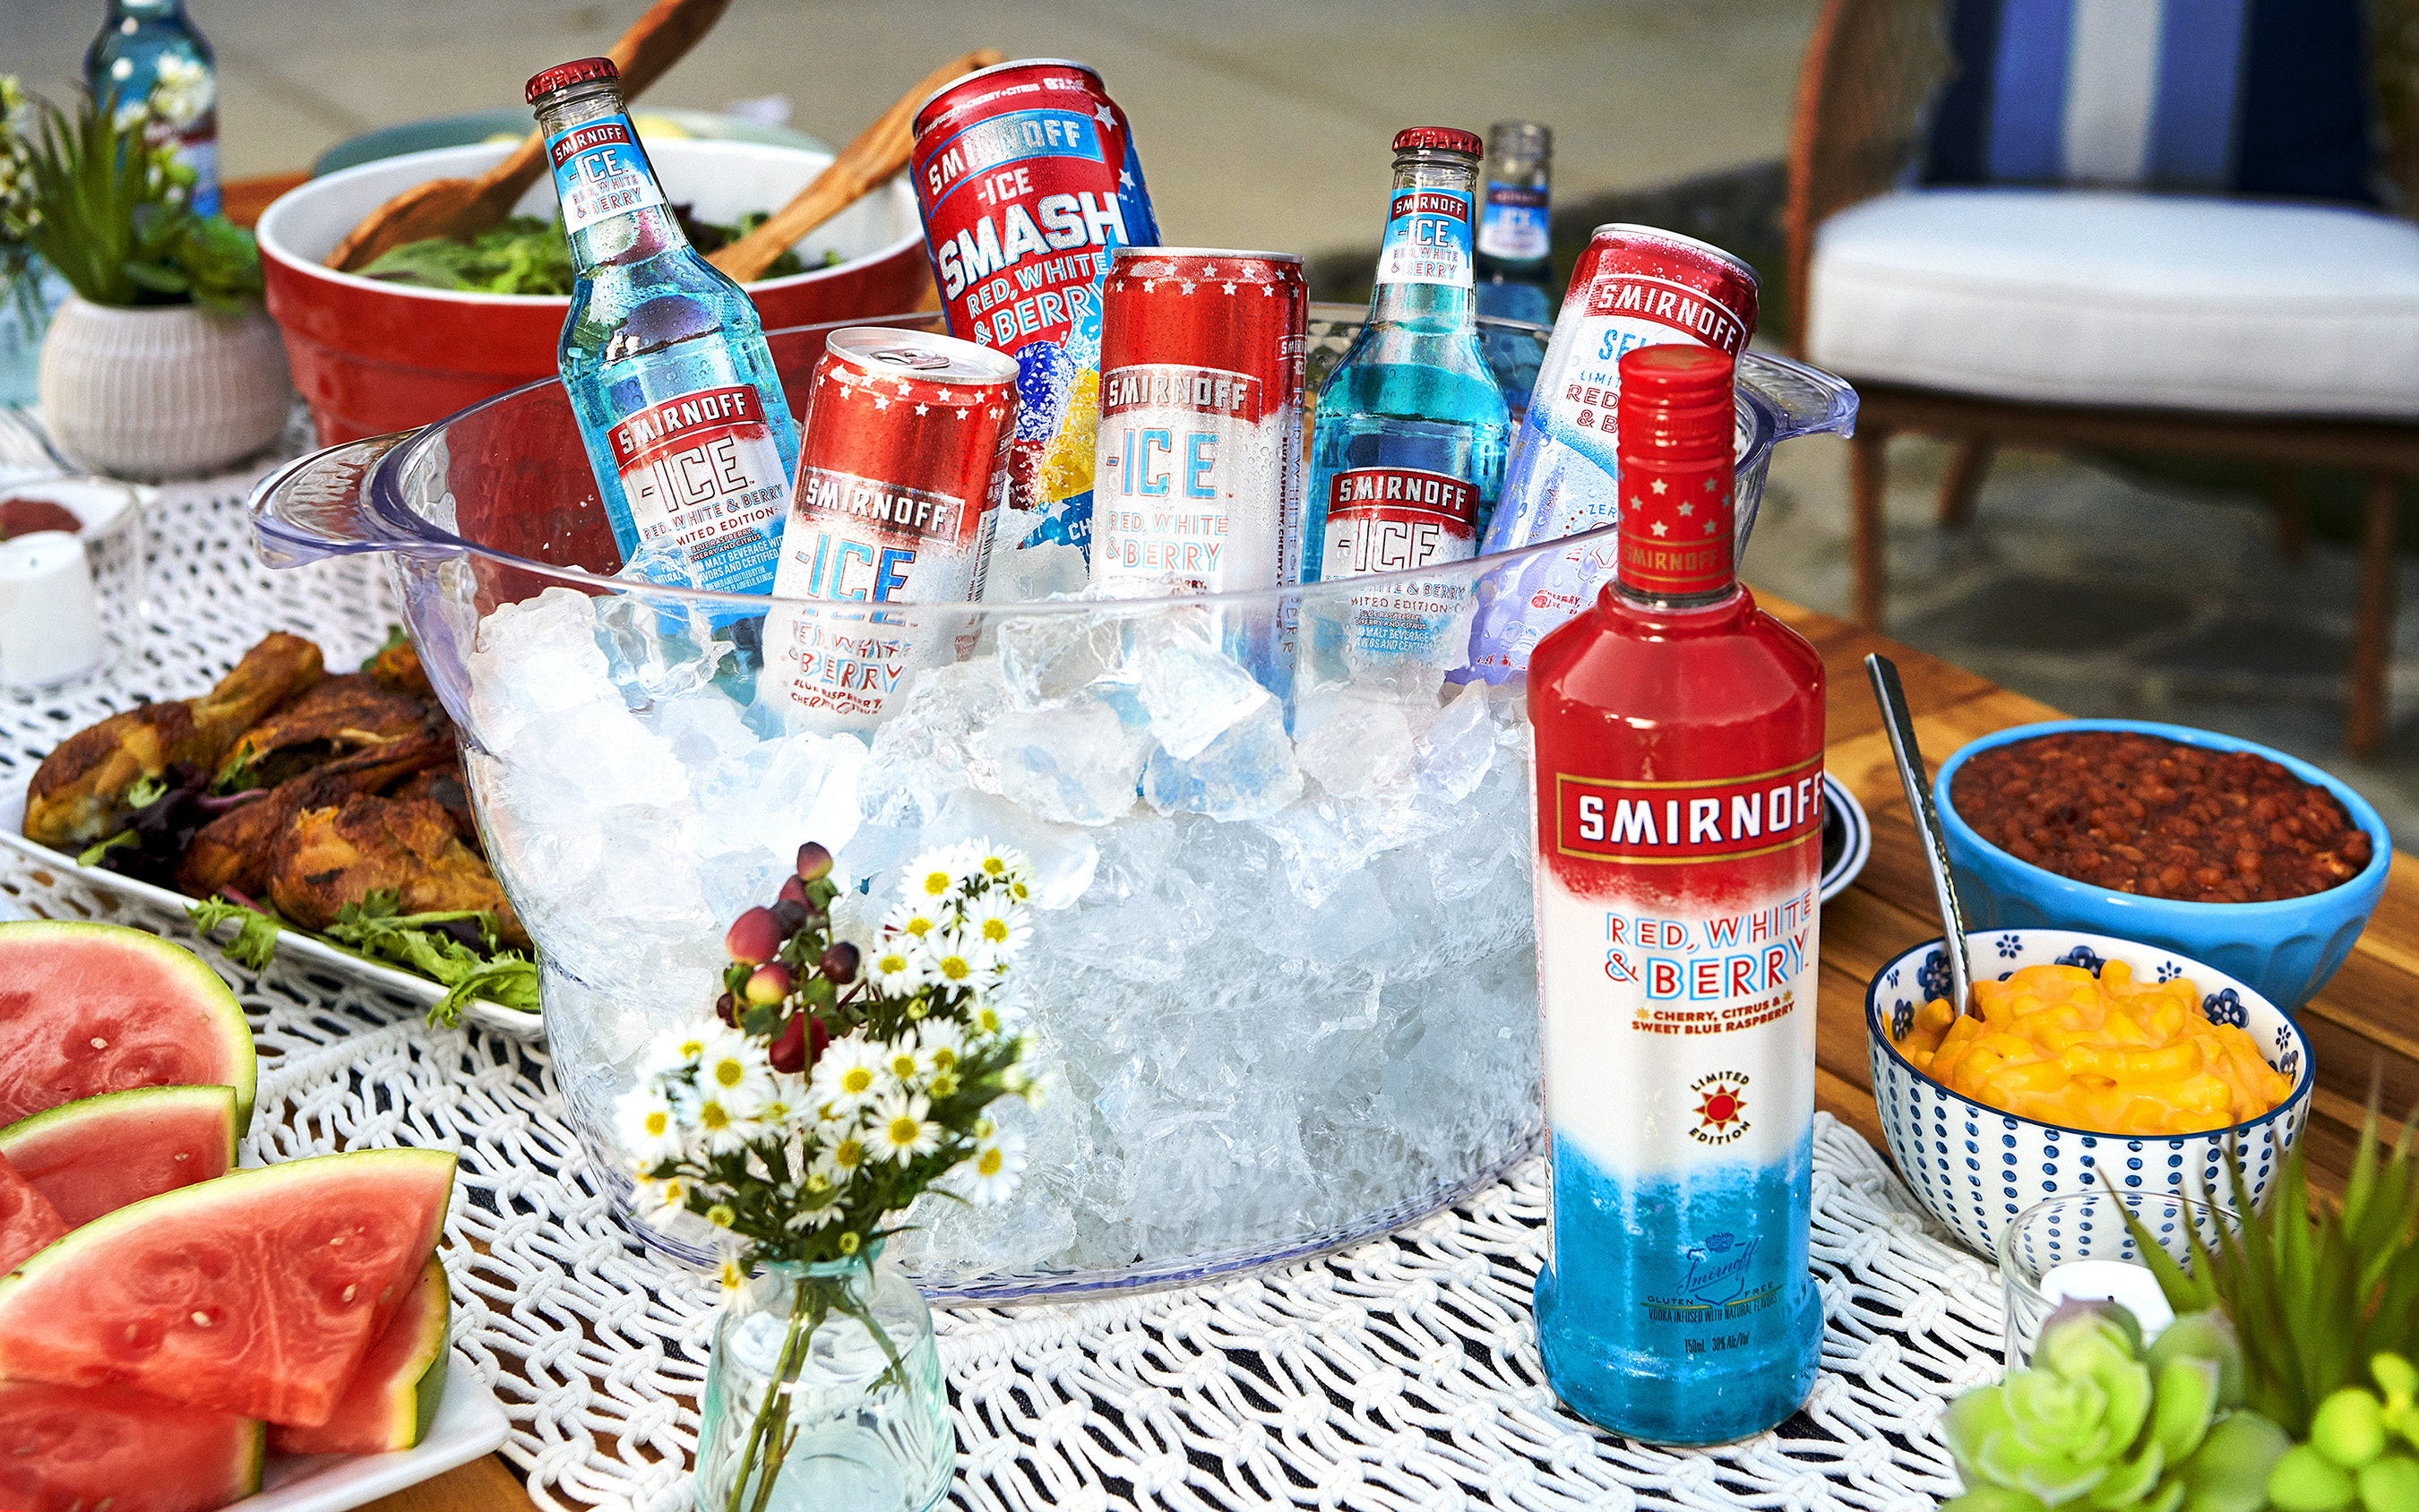 Born from the fun and nostalgic flavors of summer, the Smirnoff Red, White and Berry collection is inspiring people to enjoy summer with all the benefits of being a grownup (minus the not so fun stuff).